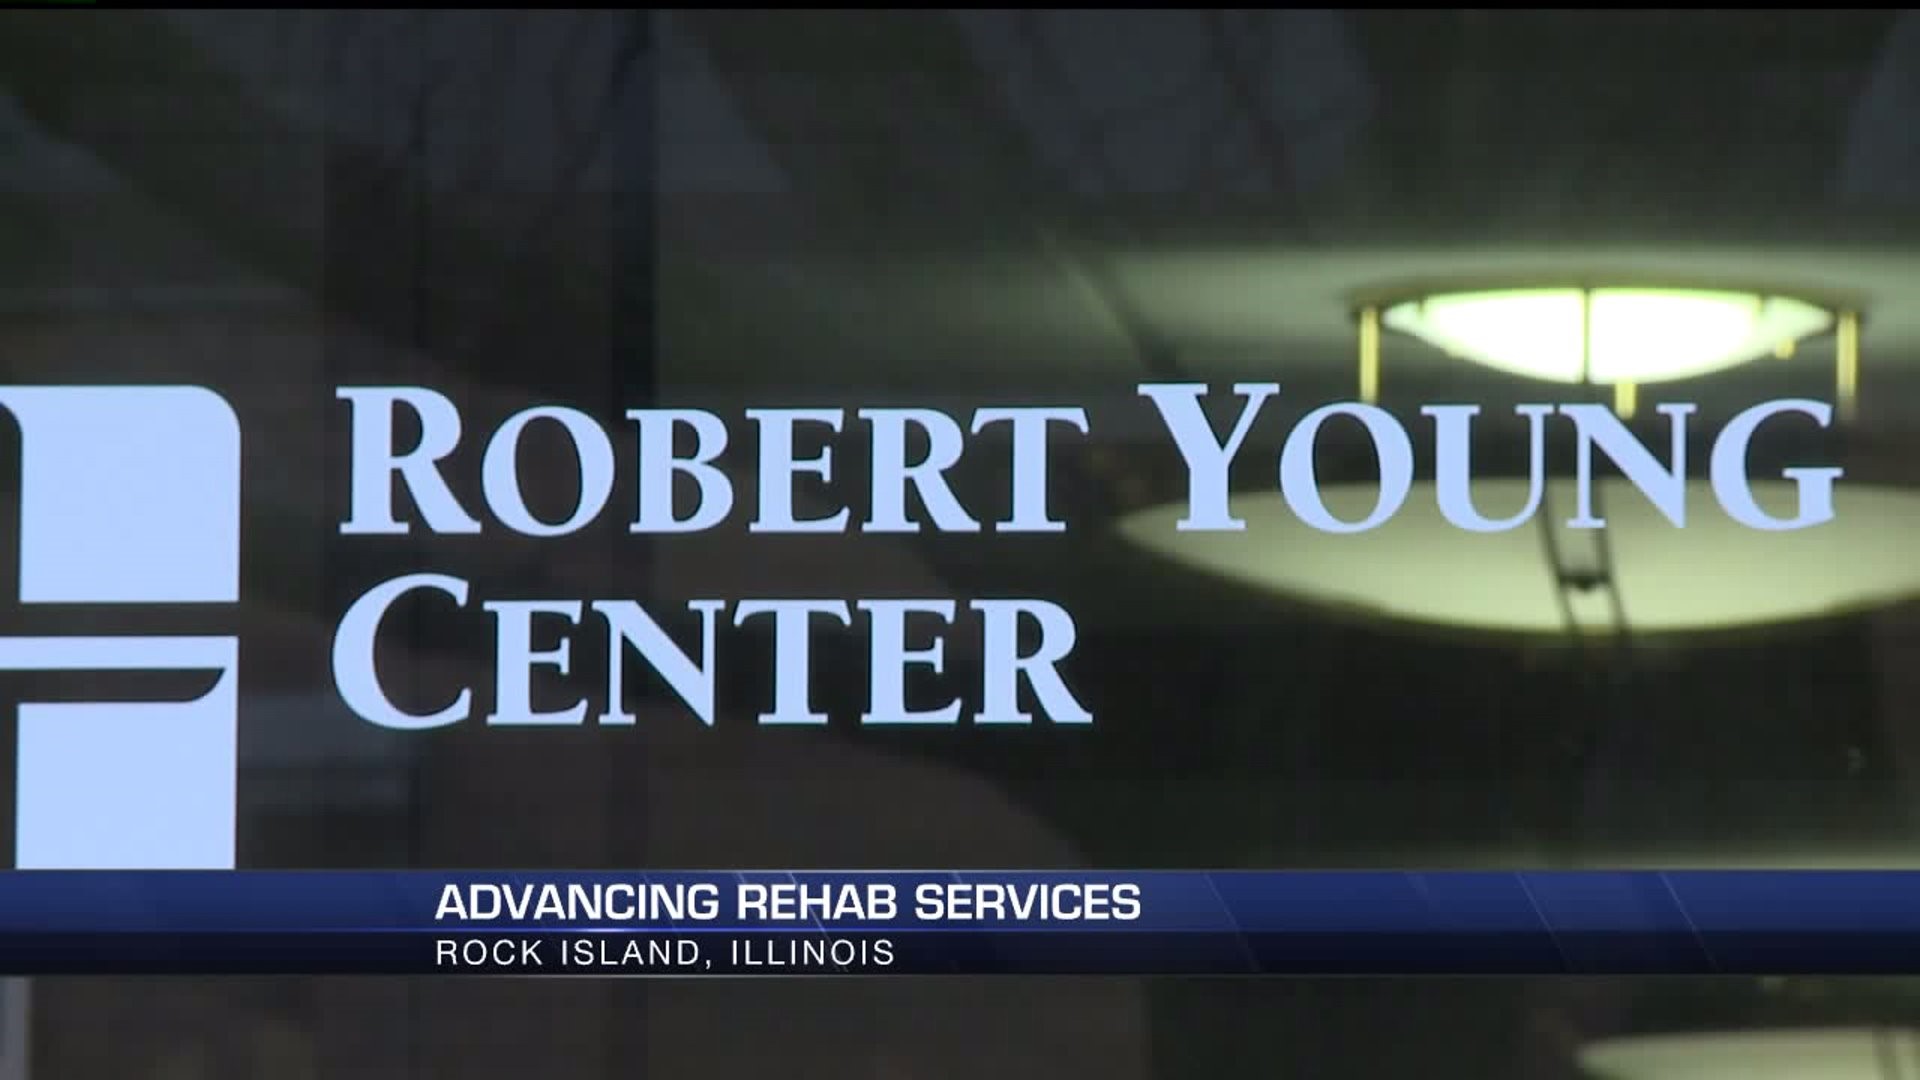 Health centers teaming to help those with mental health issues and substance abuse